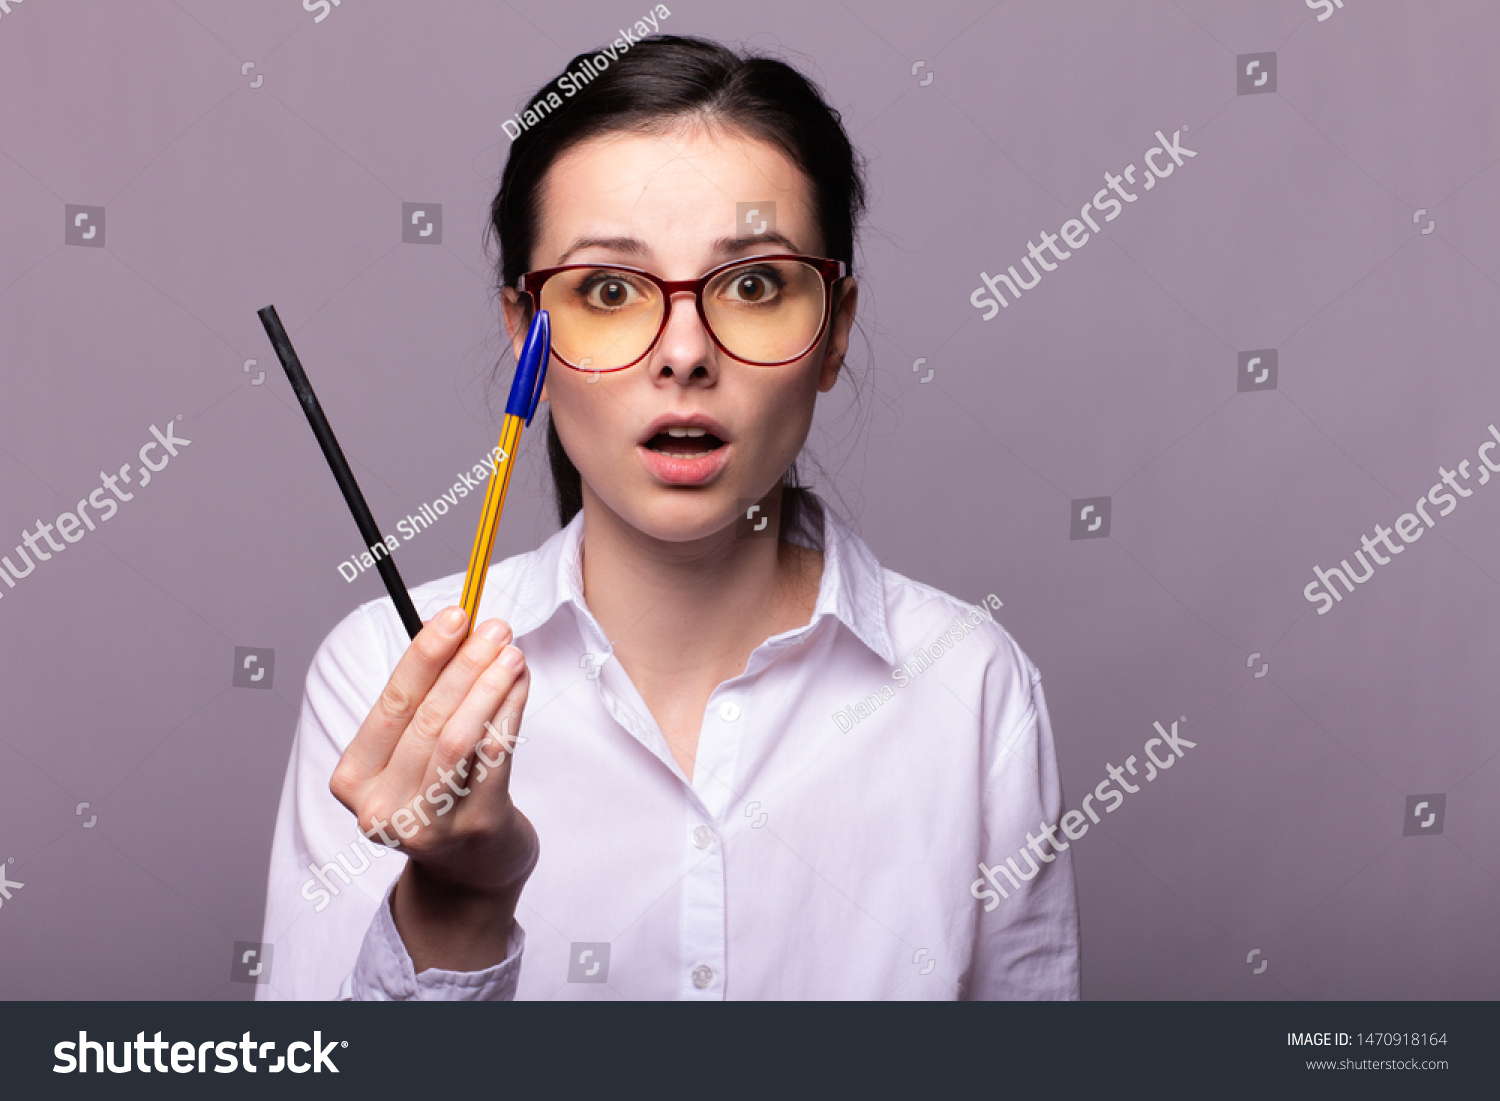 
girl in a white shirt and glasses holds a pencil and a pen in her hand #1470918164